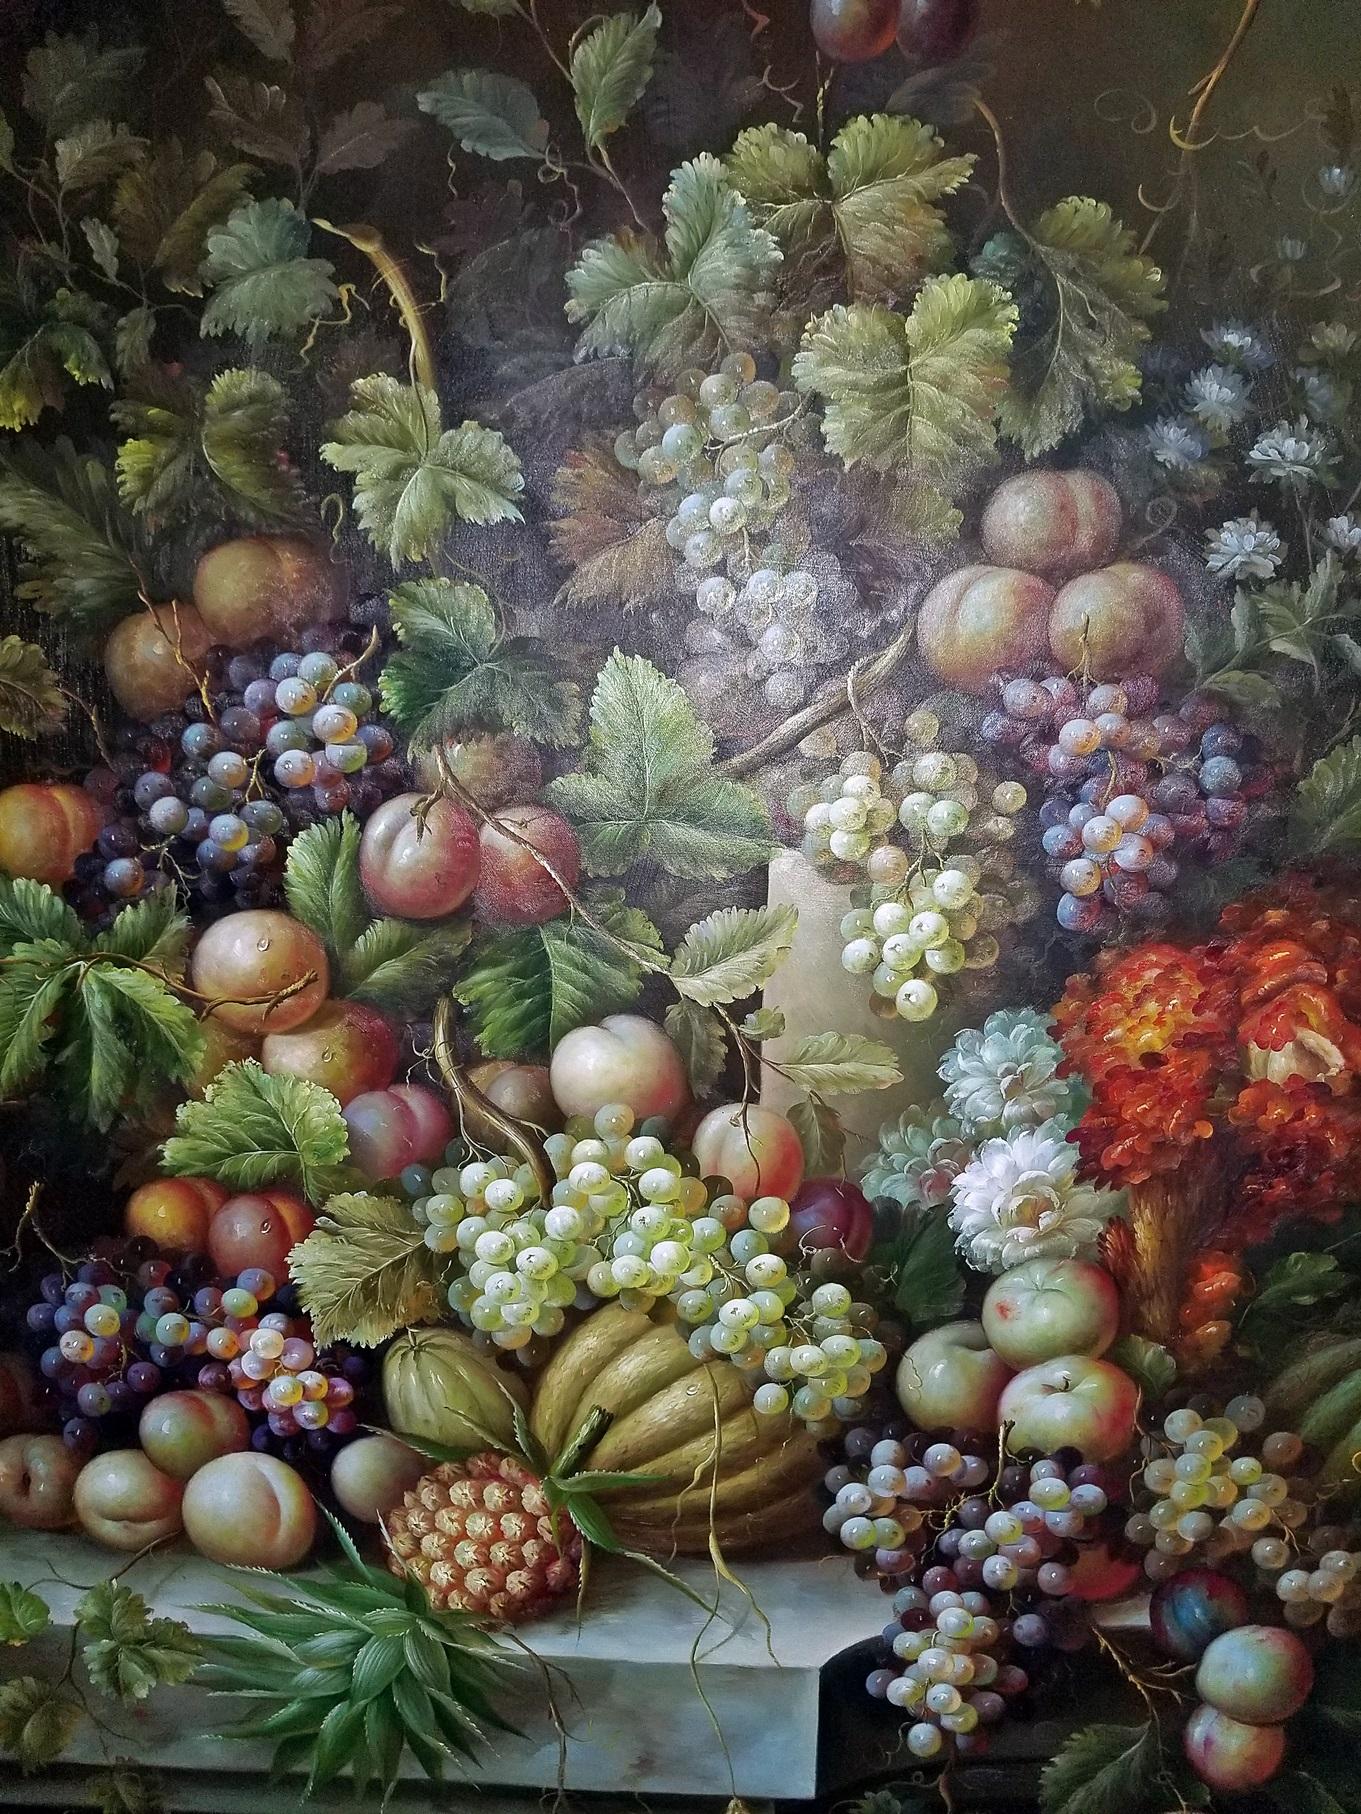 PRESENTING a GORGEOUS 20th Century and ORIGINAL MONUMENTALLY LARGE oil on canvas by M. Picot.

This is a BEAUTIFUL still life painting of fruit in classical style.

Continental School. We understand that the artist was one, Madeline Picot, who was a